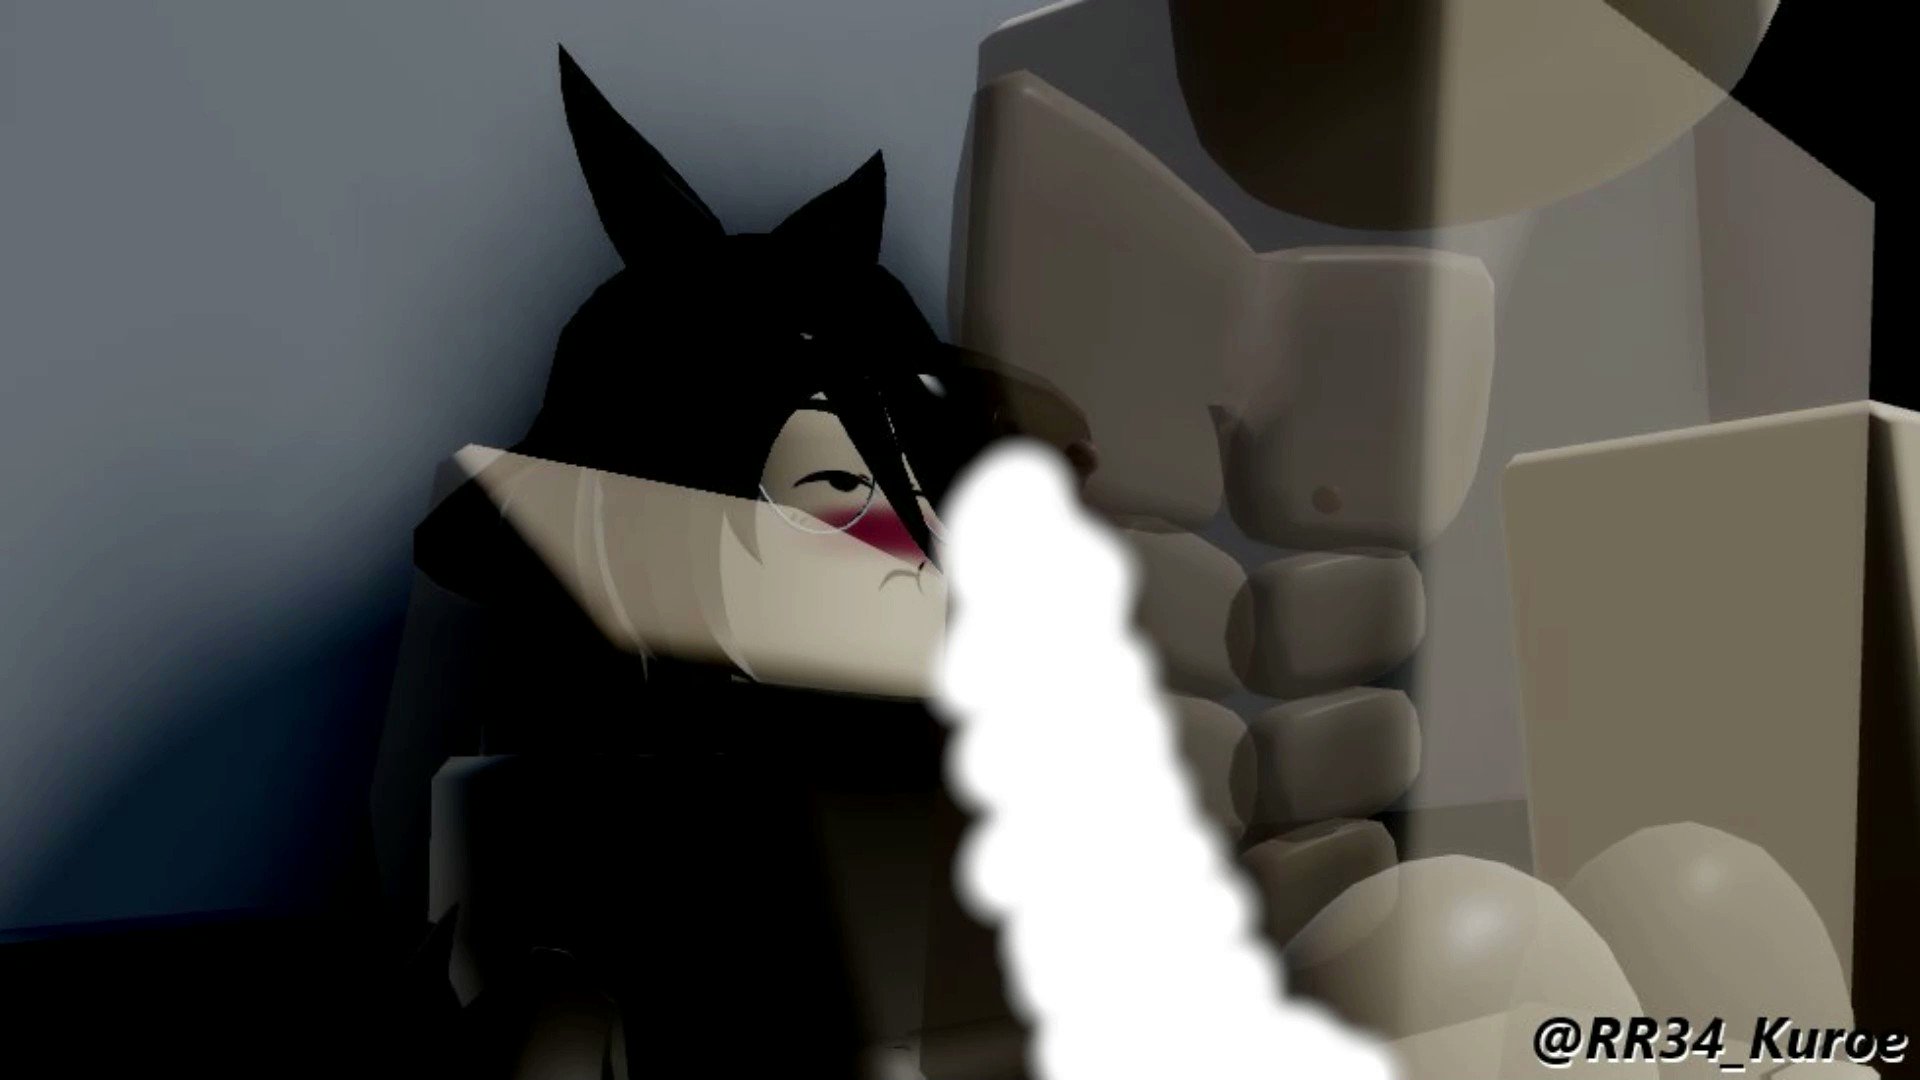 Nephlis 😈🔞 COMMS CLOSED!!! on X: I showed you my package please respond!  >m< #R63, #RR34, #RobloxPorn